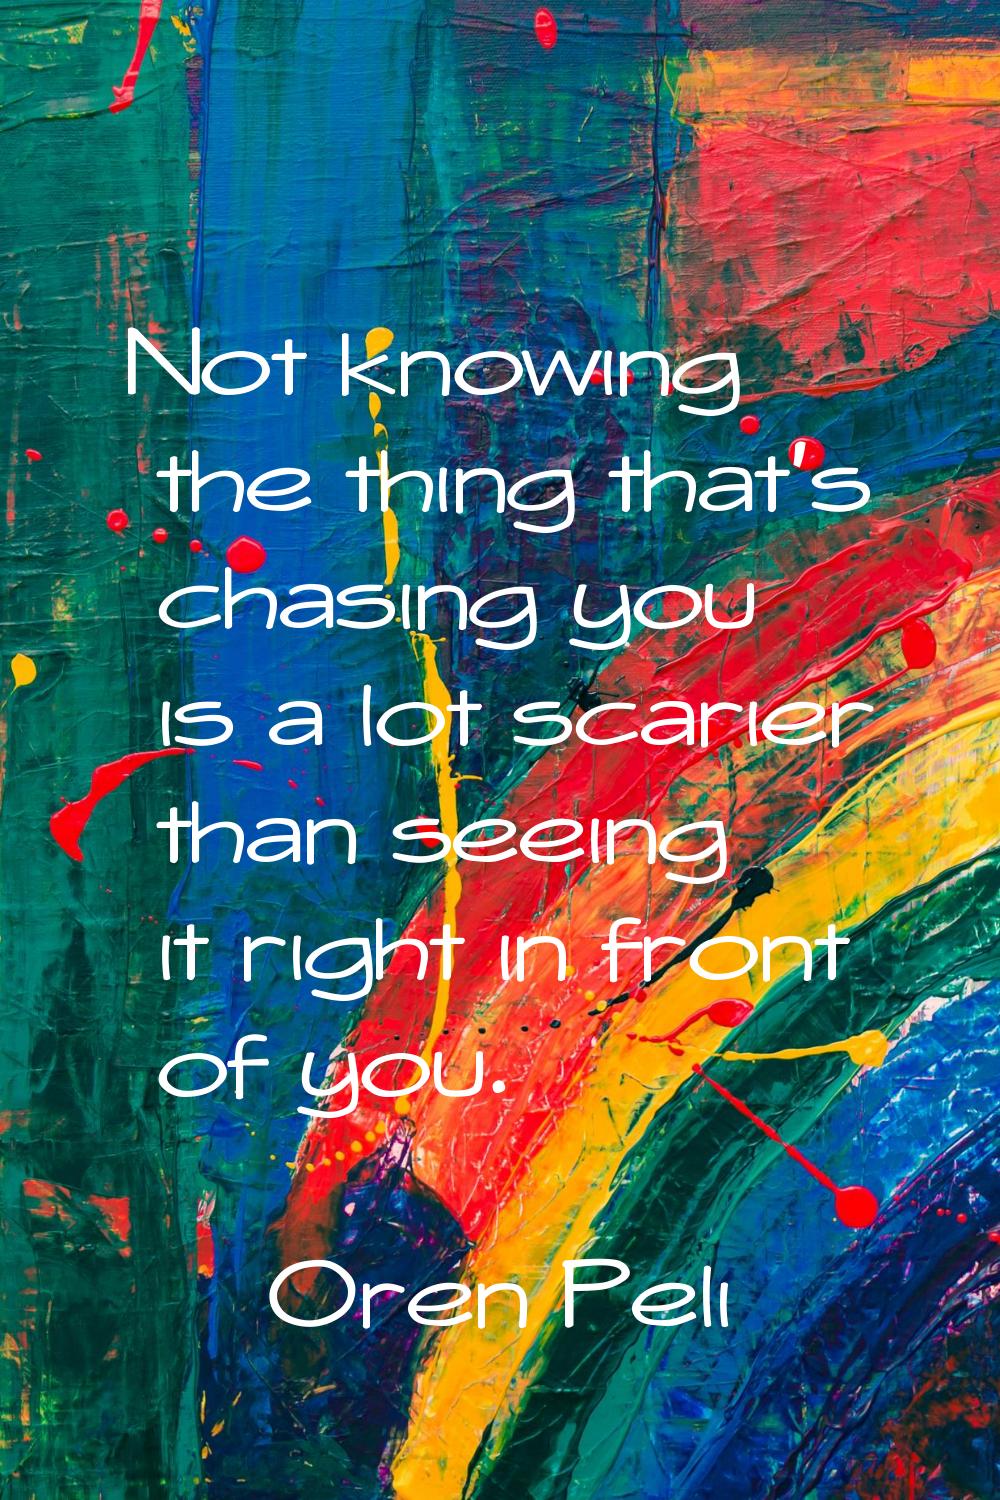 Not knowing the thing that's chasing you is a lot scarier than seeing it right in front of you.